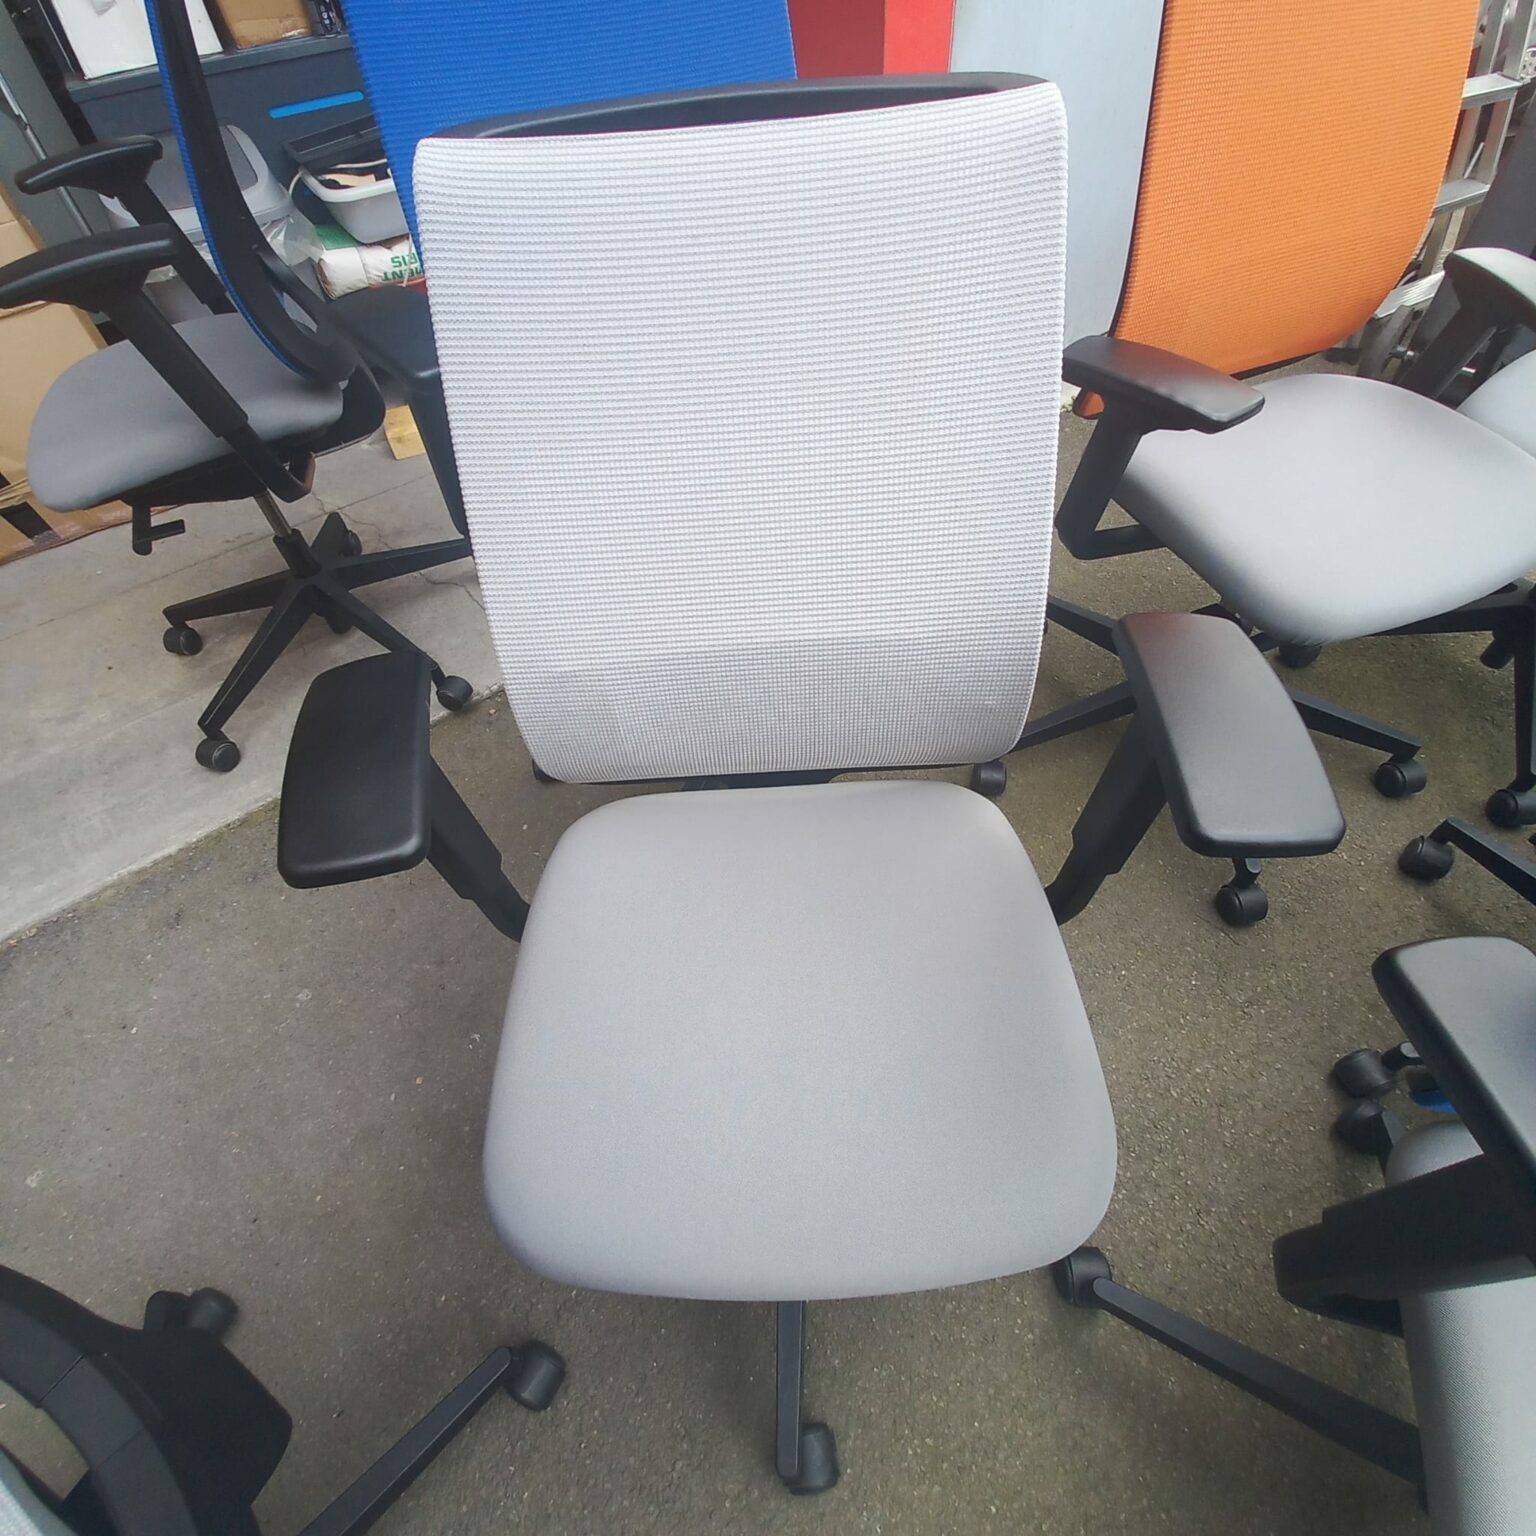 Steelcase Reply Air